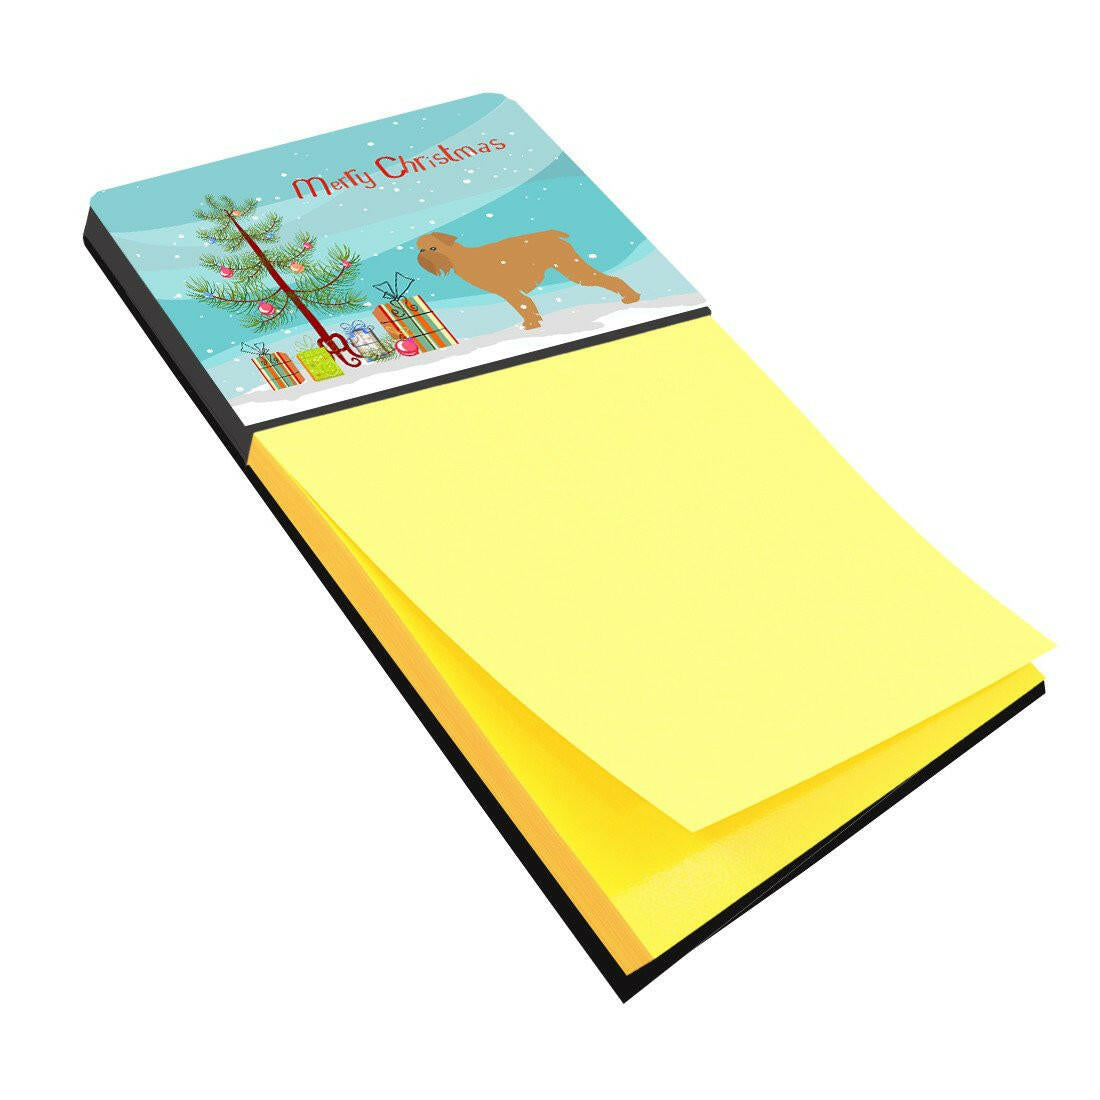 Brussels Griffon Merry Christmas Tree Sticky Note Holder BB2958SN by Caroline's Treasures